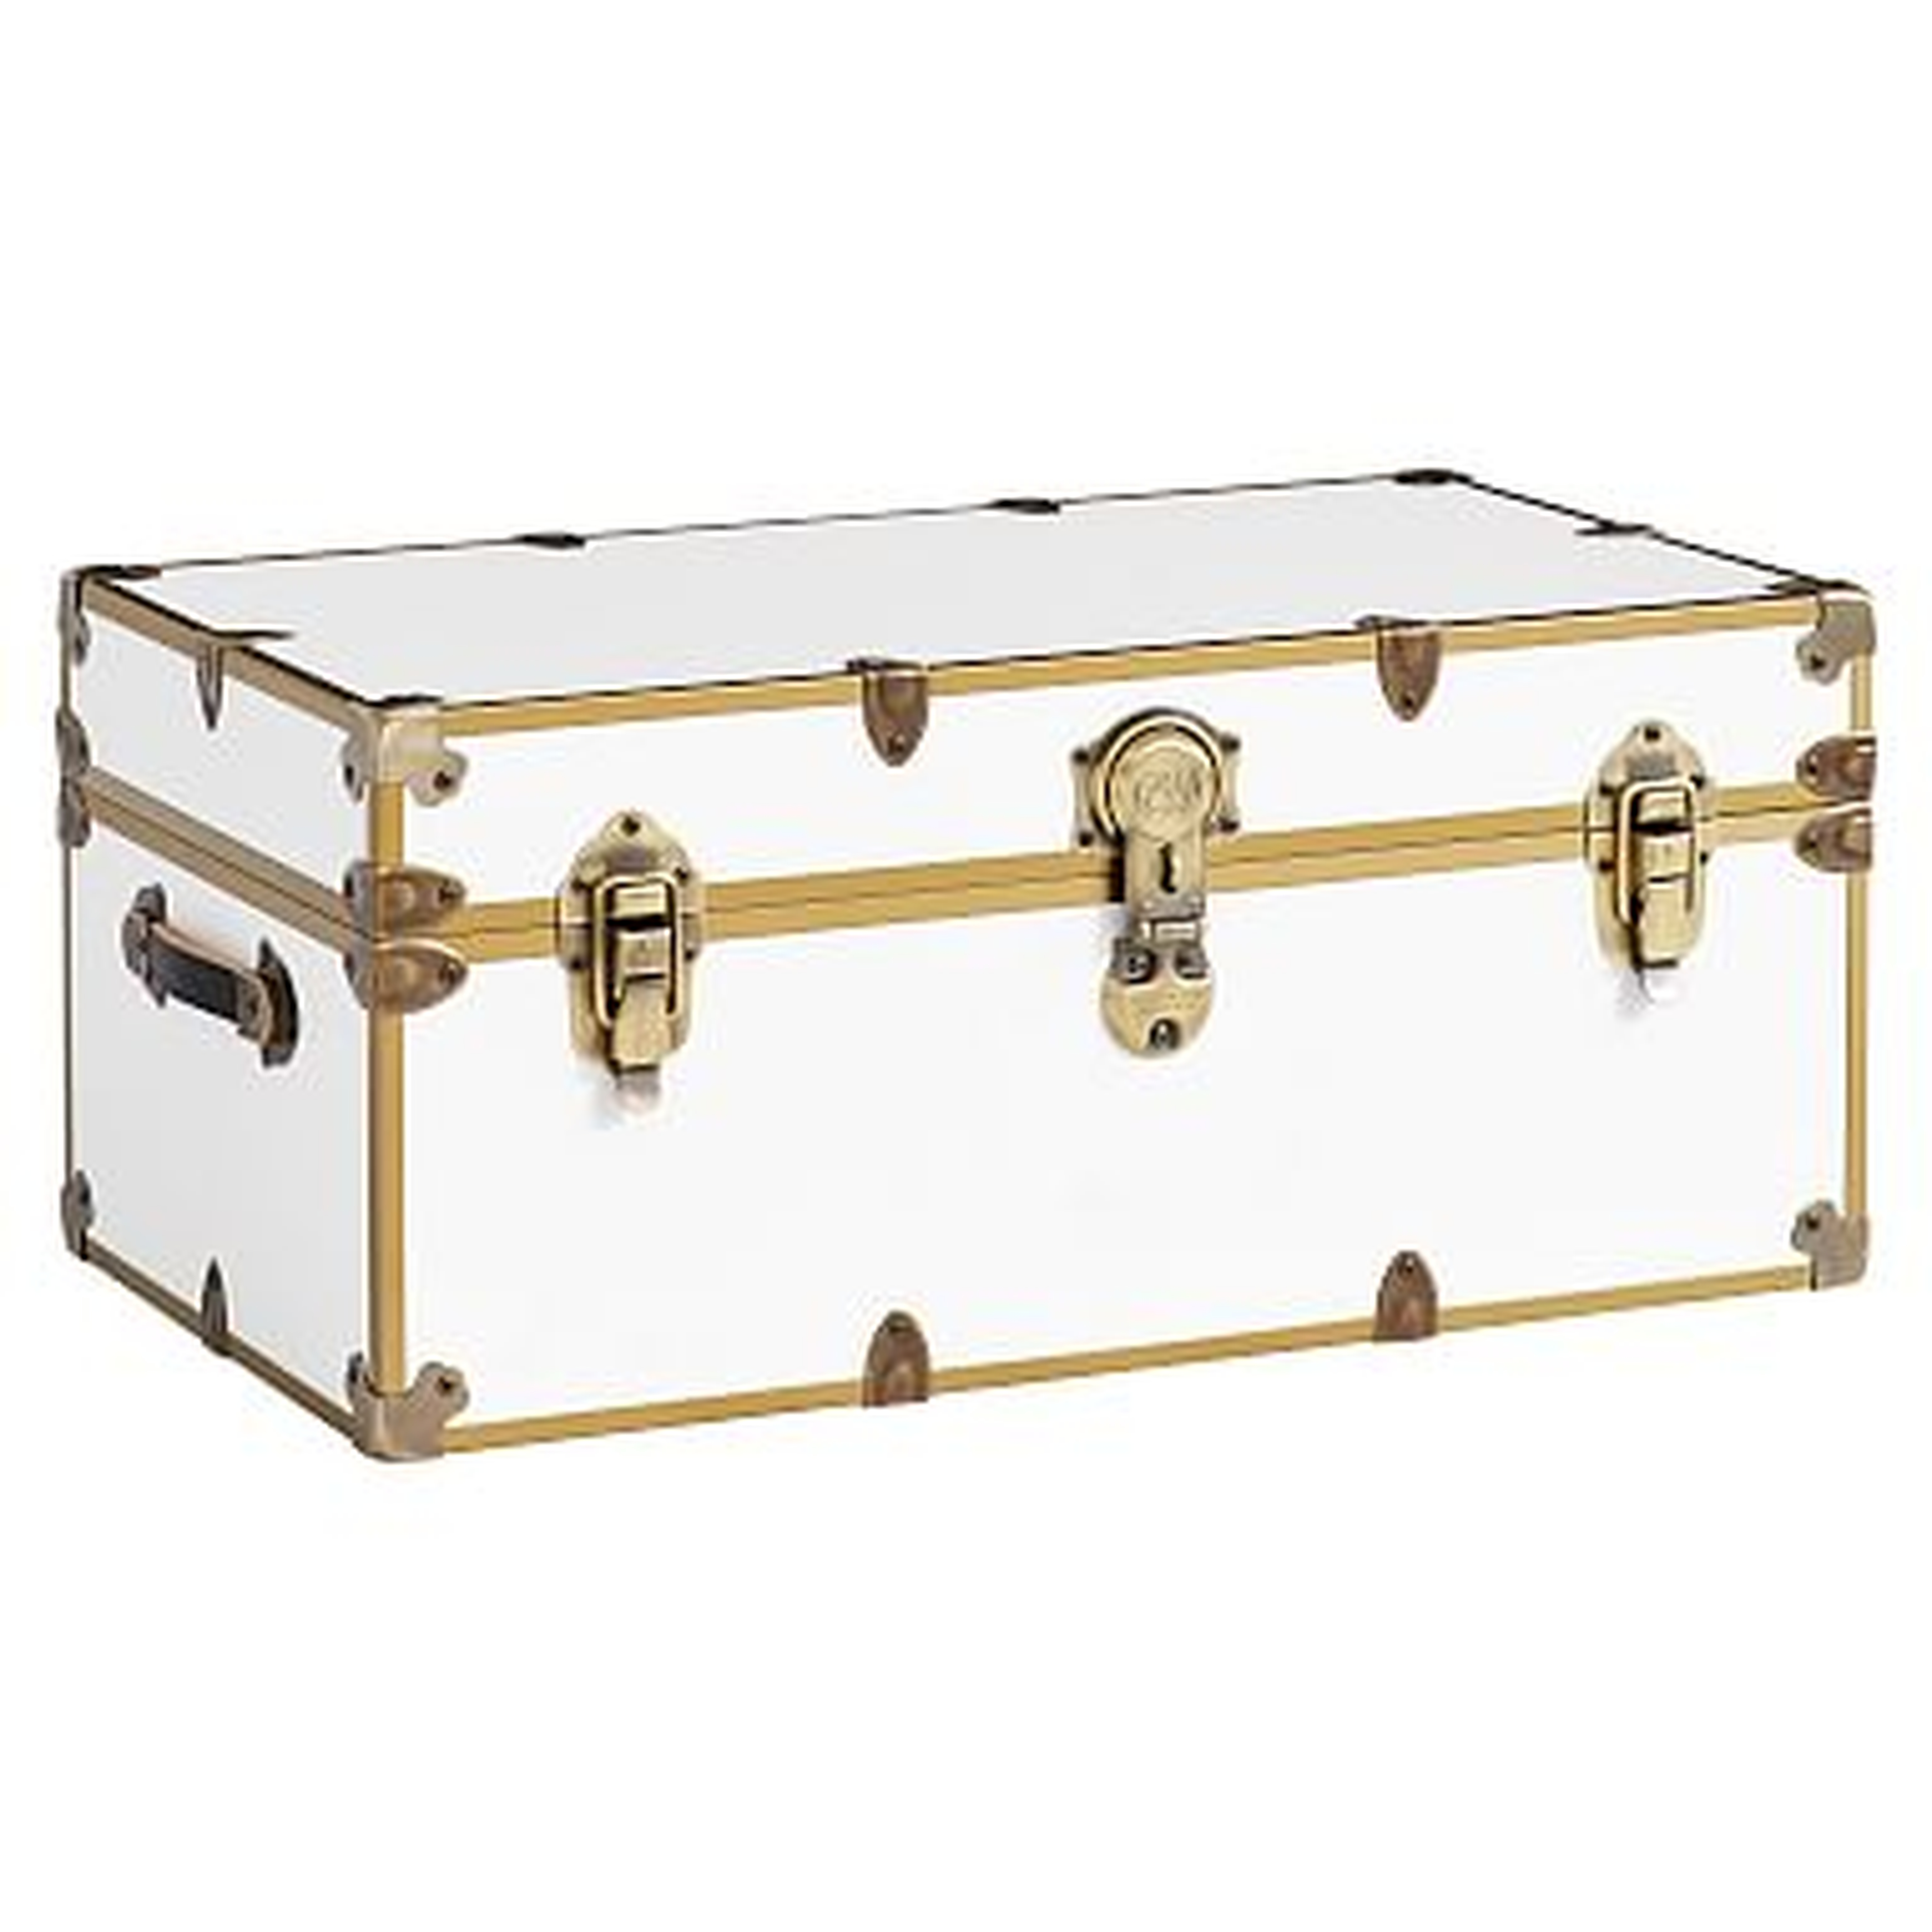 Vinyl Dorm Trunk, White with Rubbed Brass, Standard - Pottery Barn Teen